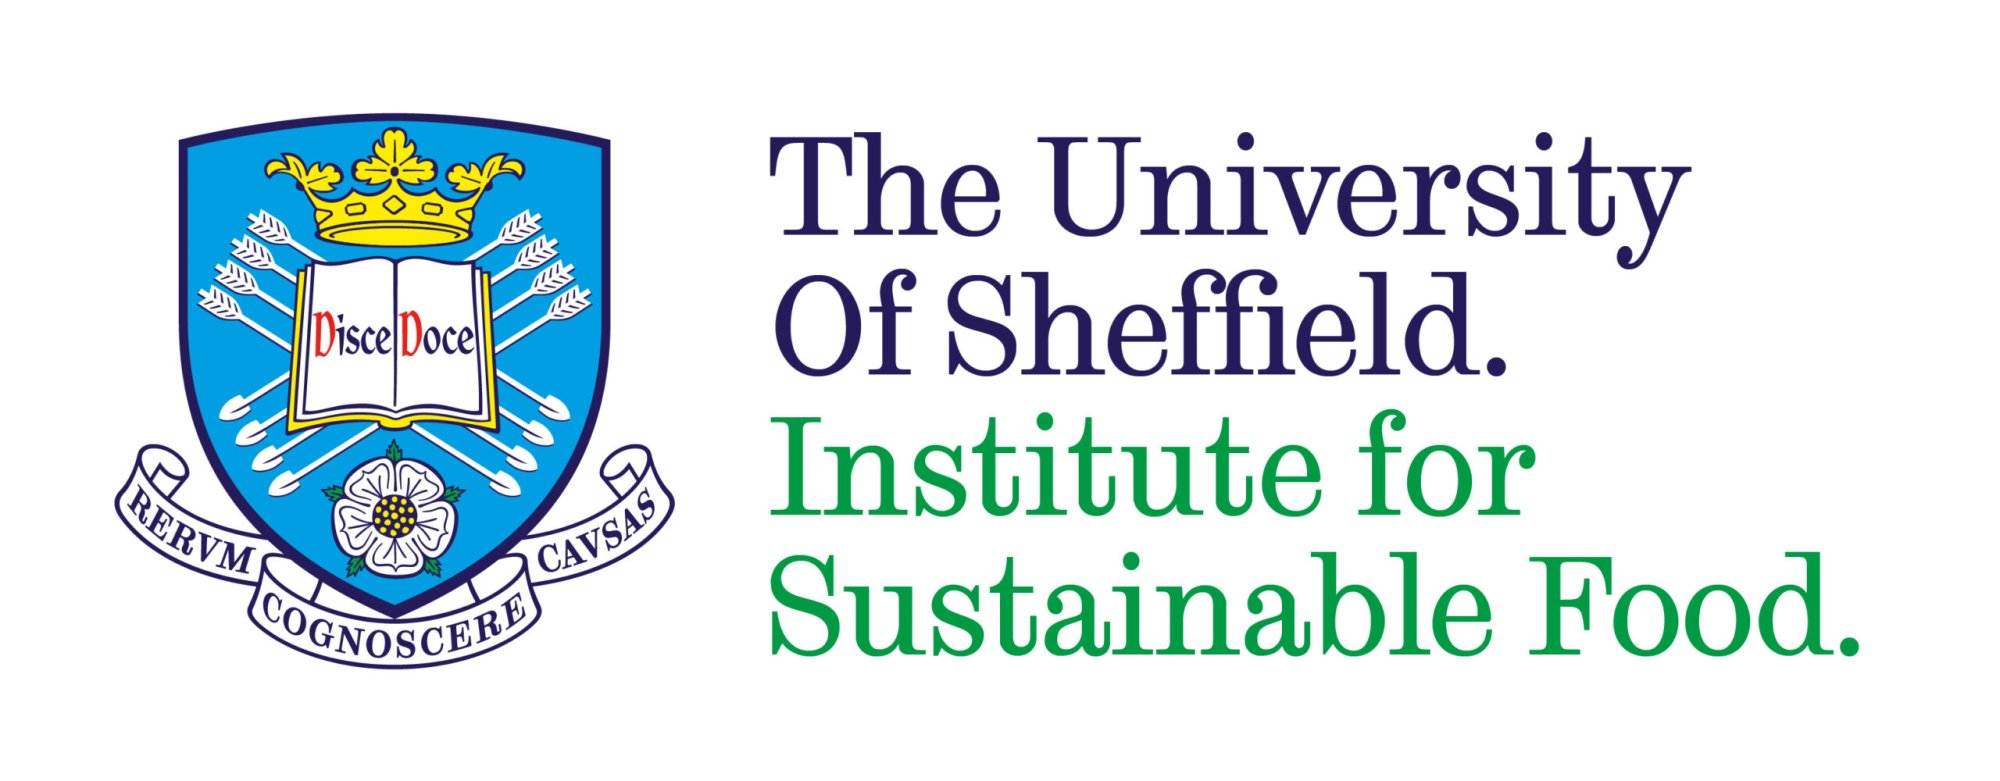 Institute for Sustainable Food, University of Sheffield